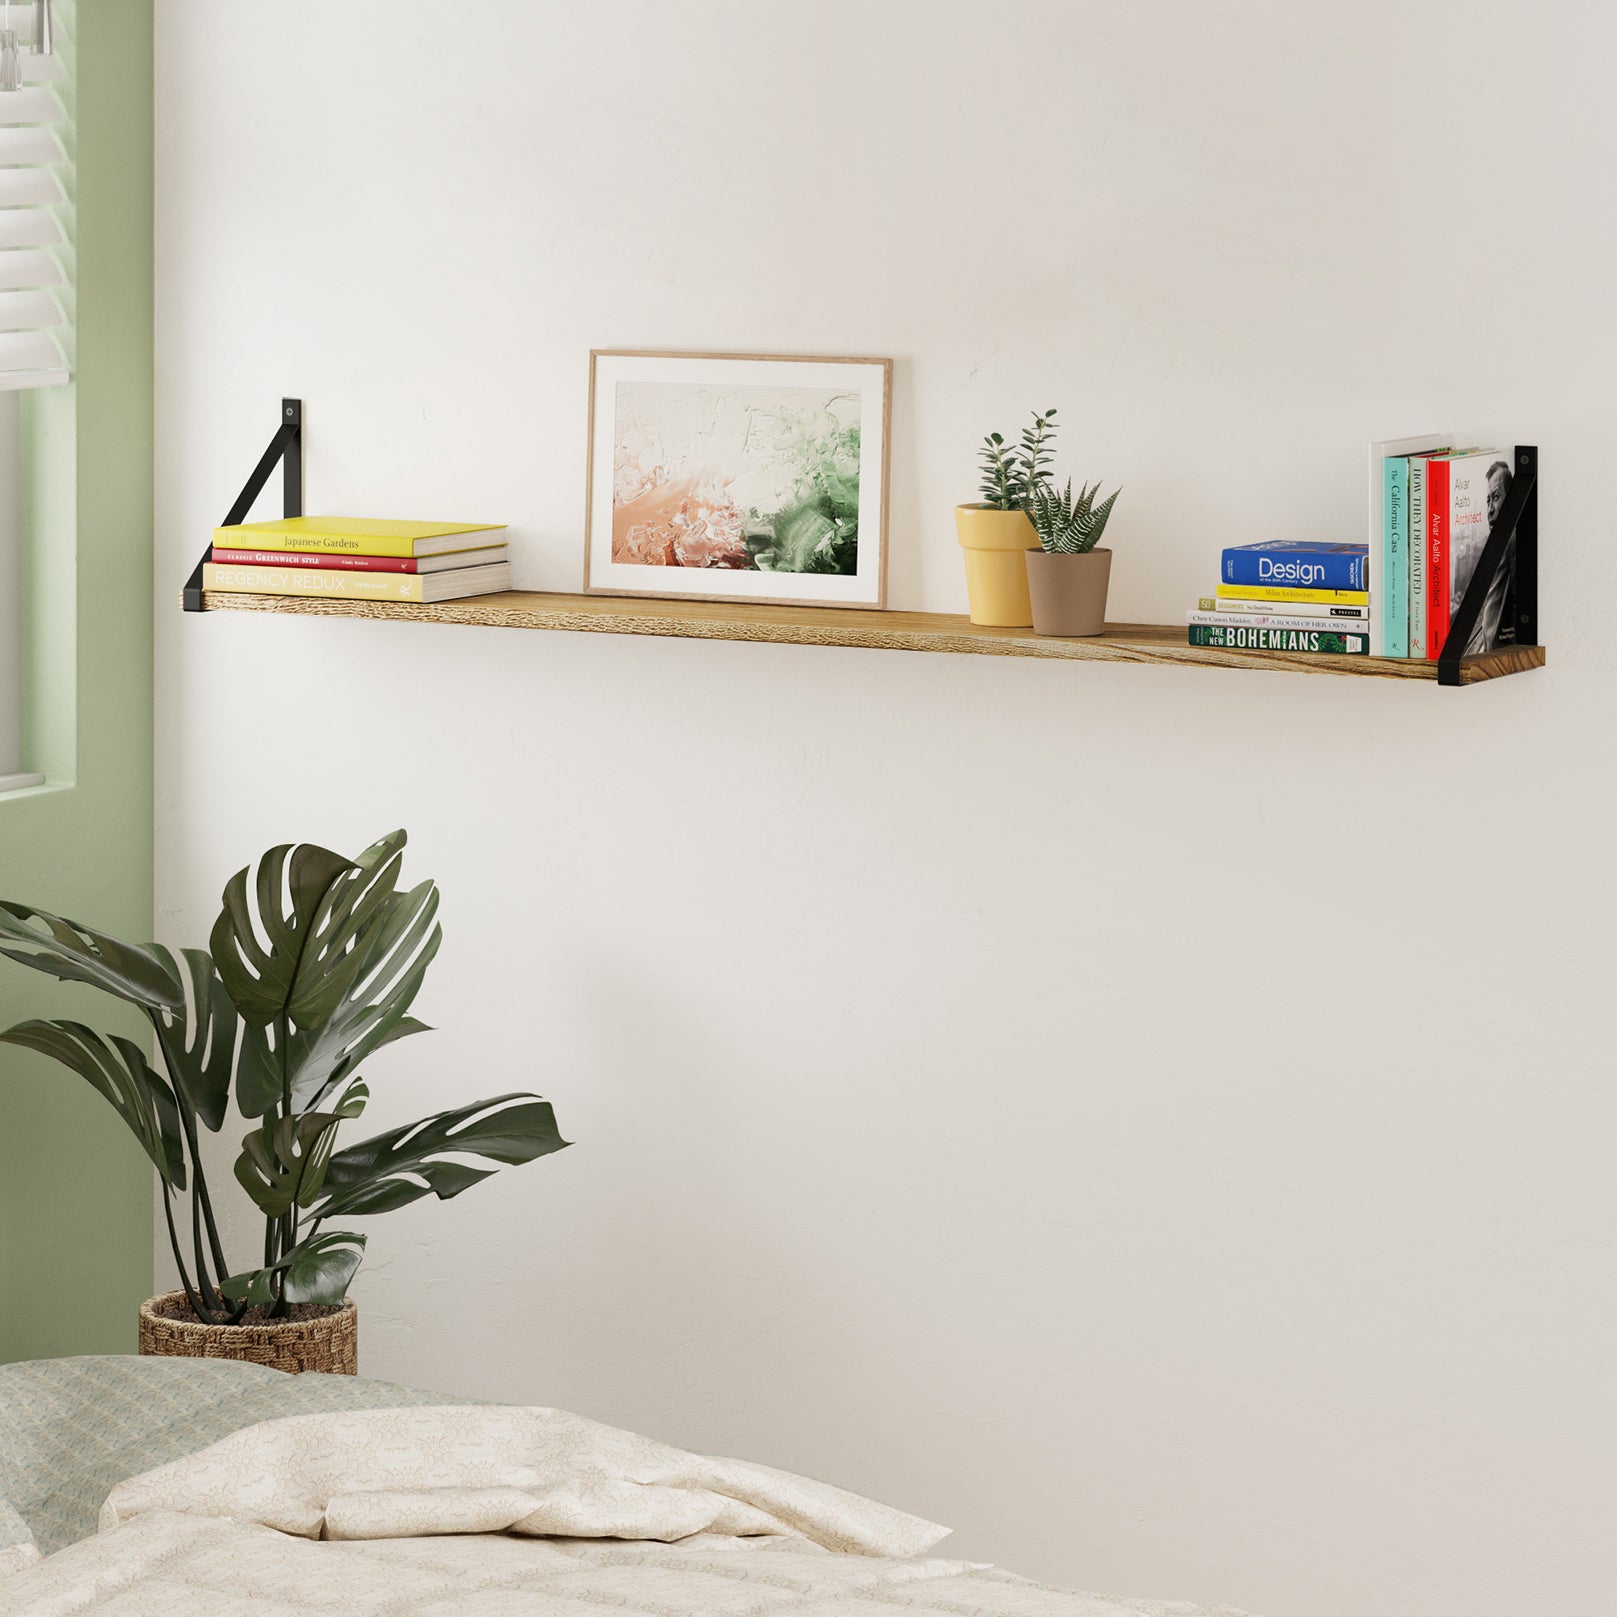 Book shelf for bedroom in a serene bedroom, adorned with books and small plants.